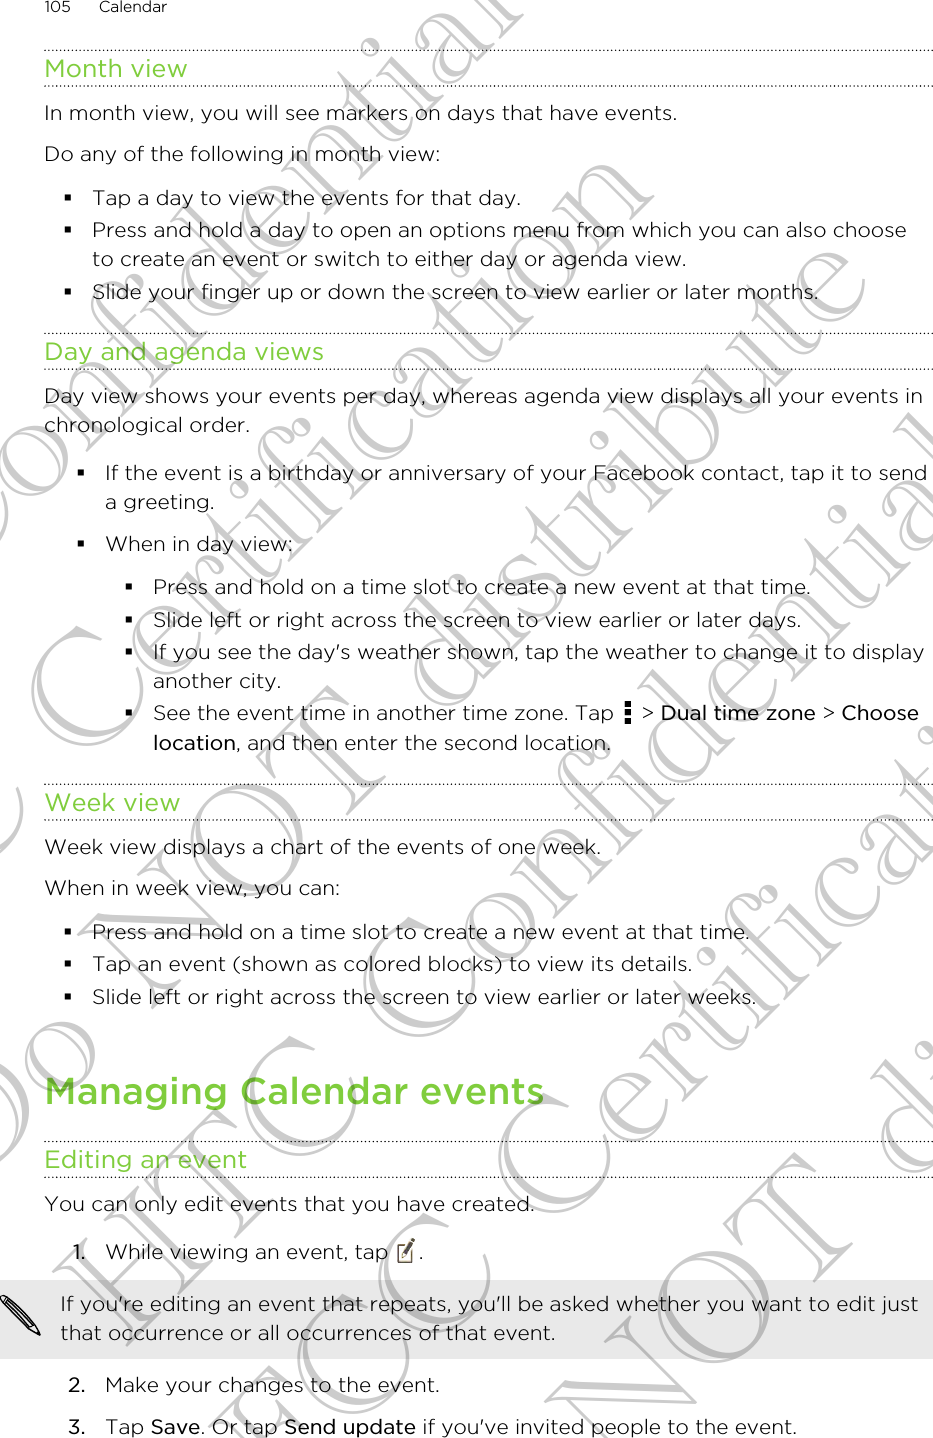 Month viewIn month view, you will see markers on days that have events.Do any of the following in month view:§Tap a day to view the events for that day.§Press and hold a day to open an options menu from which you can also chooseto create an event or switch to either day or agenda view.§Slide your finger up or down the screen to view earlier or later months.Day and agenda viewsDay view shows your events per day, whereas agenda view displays all your events inchronological order.§If the event is a birthday or anniversary of your Facebook contact, tap it to senda greeting.§When in day view:§Press and hold on a time slot to create a new event at that time.§Slide left or right across the screen to view earlier or later days.§If you see the day&apos;s weather shown, tap the weather to change it to displayanother city.§See the event time in another time zone. Tap   &gt; Dual time zone &gt; Chooselocation, and then enter the second location.Week viewWeek view displays a chart of the events of one week.When in week view, you can:§Press and hold on a time slot to create a new event at that time.§Tap an event (shown as colored blocks) to view its details.§Slide left or right across the screen to view earlier or later weeks.Managing Calendar eventsEditing an eventYou can only edit events that you have created.1. While viewing an event, tap  . If you&apos;re editing an event that repeats, you&apos;ll be asked whether you want to edit justthat occurrence or all occurrences of that event.2. Make your changes to the event.3. Tap Save. Or tap Send update if you&apos;ve invited people to the event.105 CalendarHTC Confidential FCC Certification Do NOT distribute HTC Confidential FCC Certification Do NOT distribute